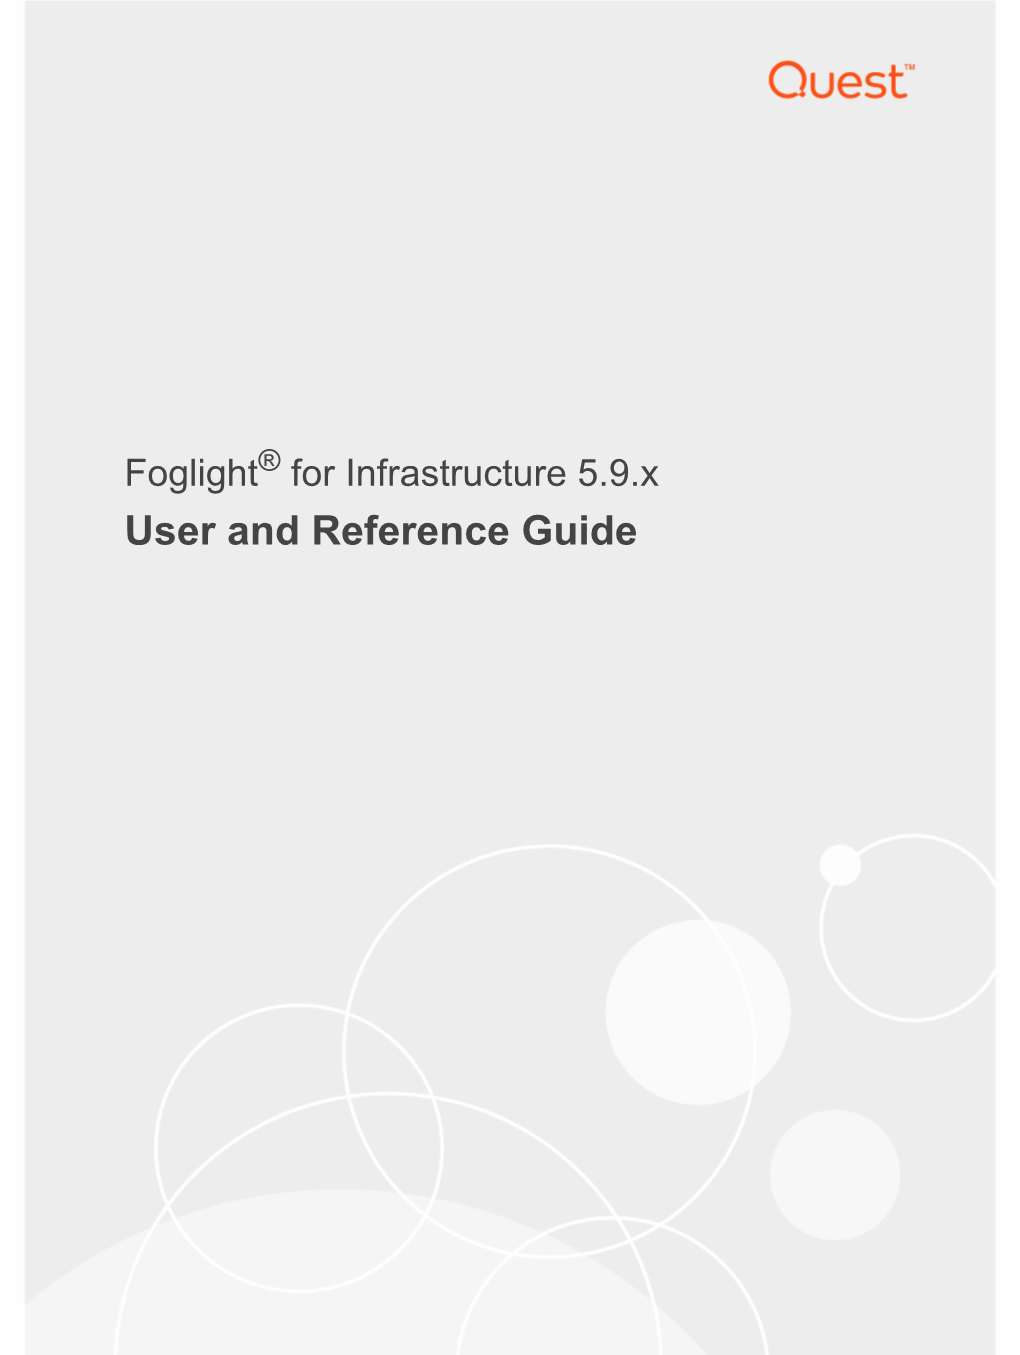 Foglight for Infrastructure User and Reference Guide Updated - May 2020 Foglight Version - 5.9.X Cartridge Version - 5.9.X Contents